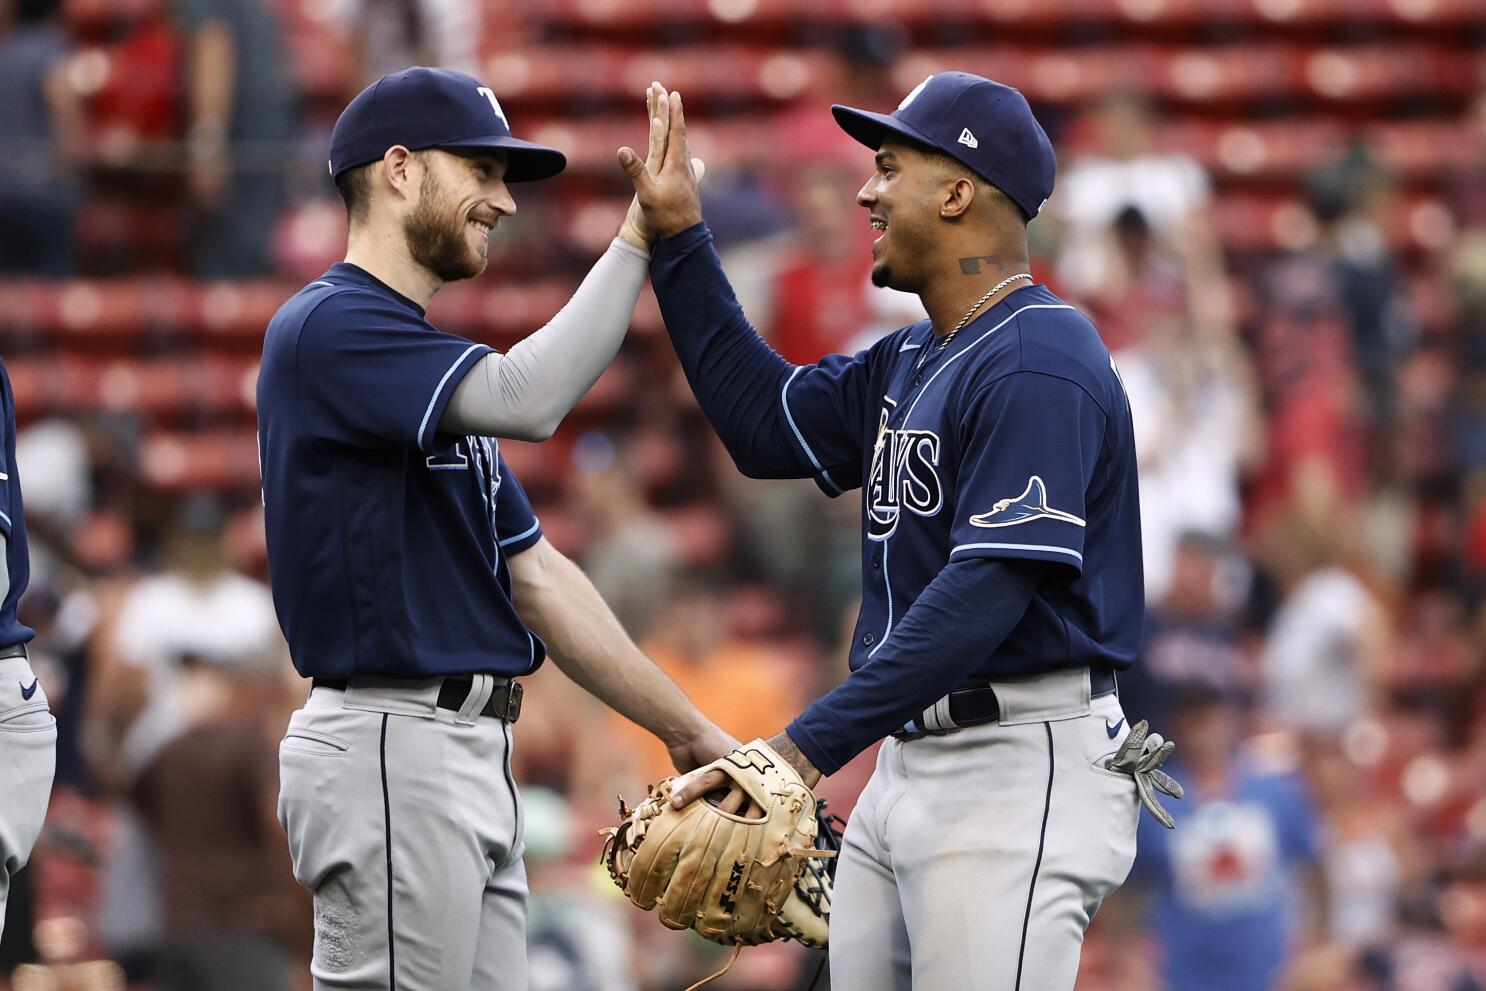 Wild-card Rays lose 5th straight, fall 6-3 to Red Sox